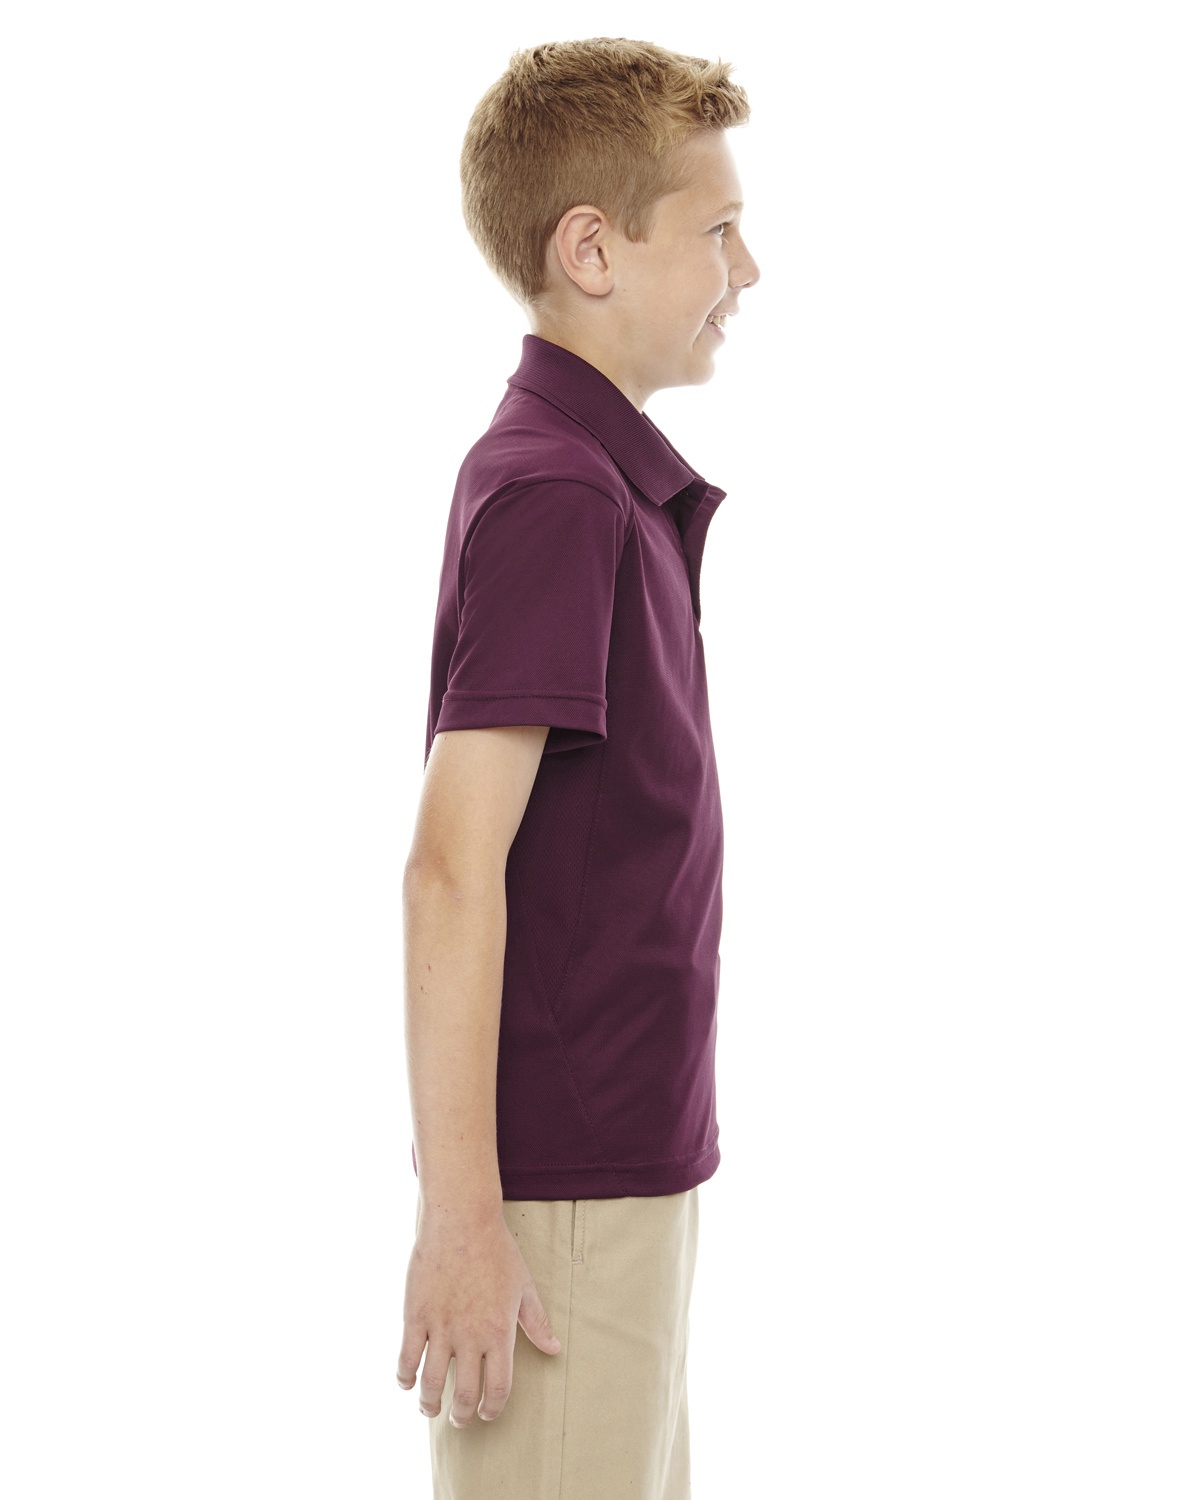 'Ash City - Extreme 65108 Youth Eperformance Shield Snag Protection Short-Sleeve Polo'